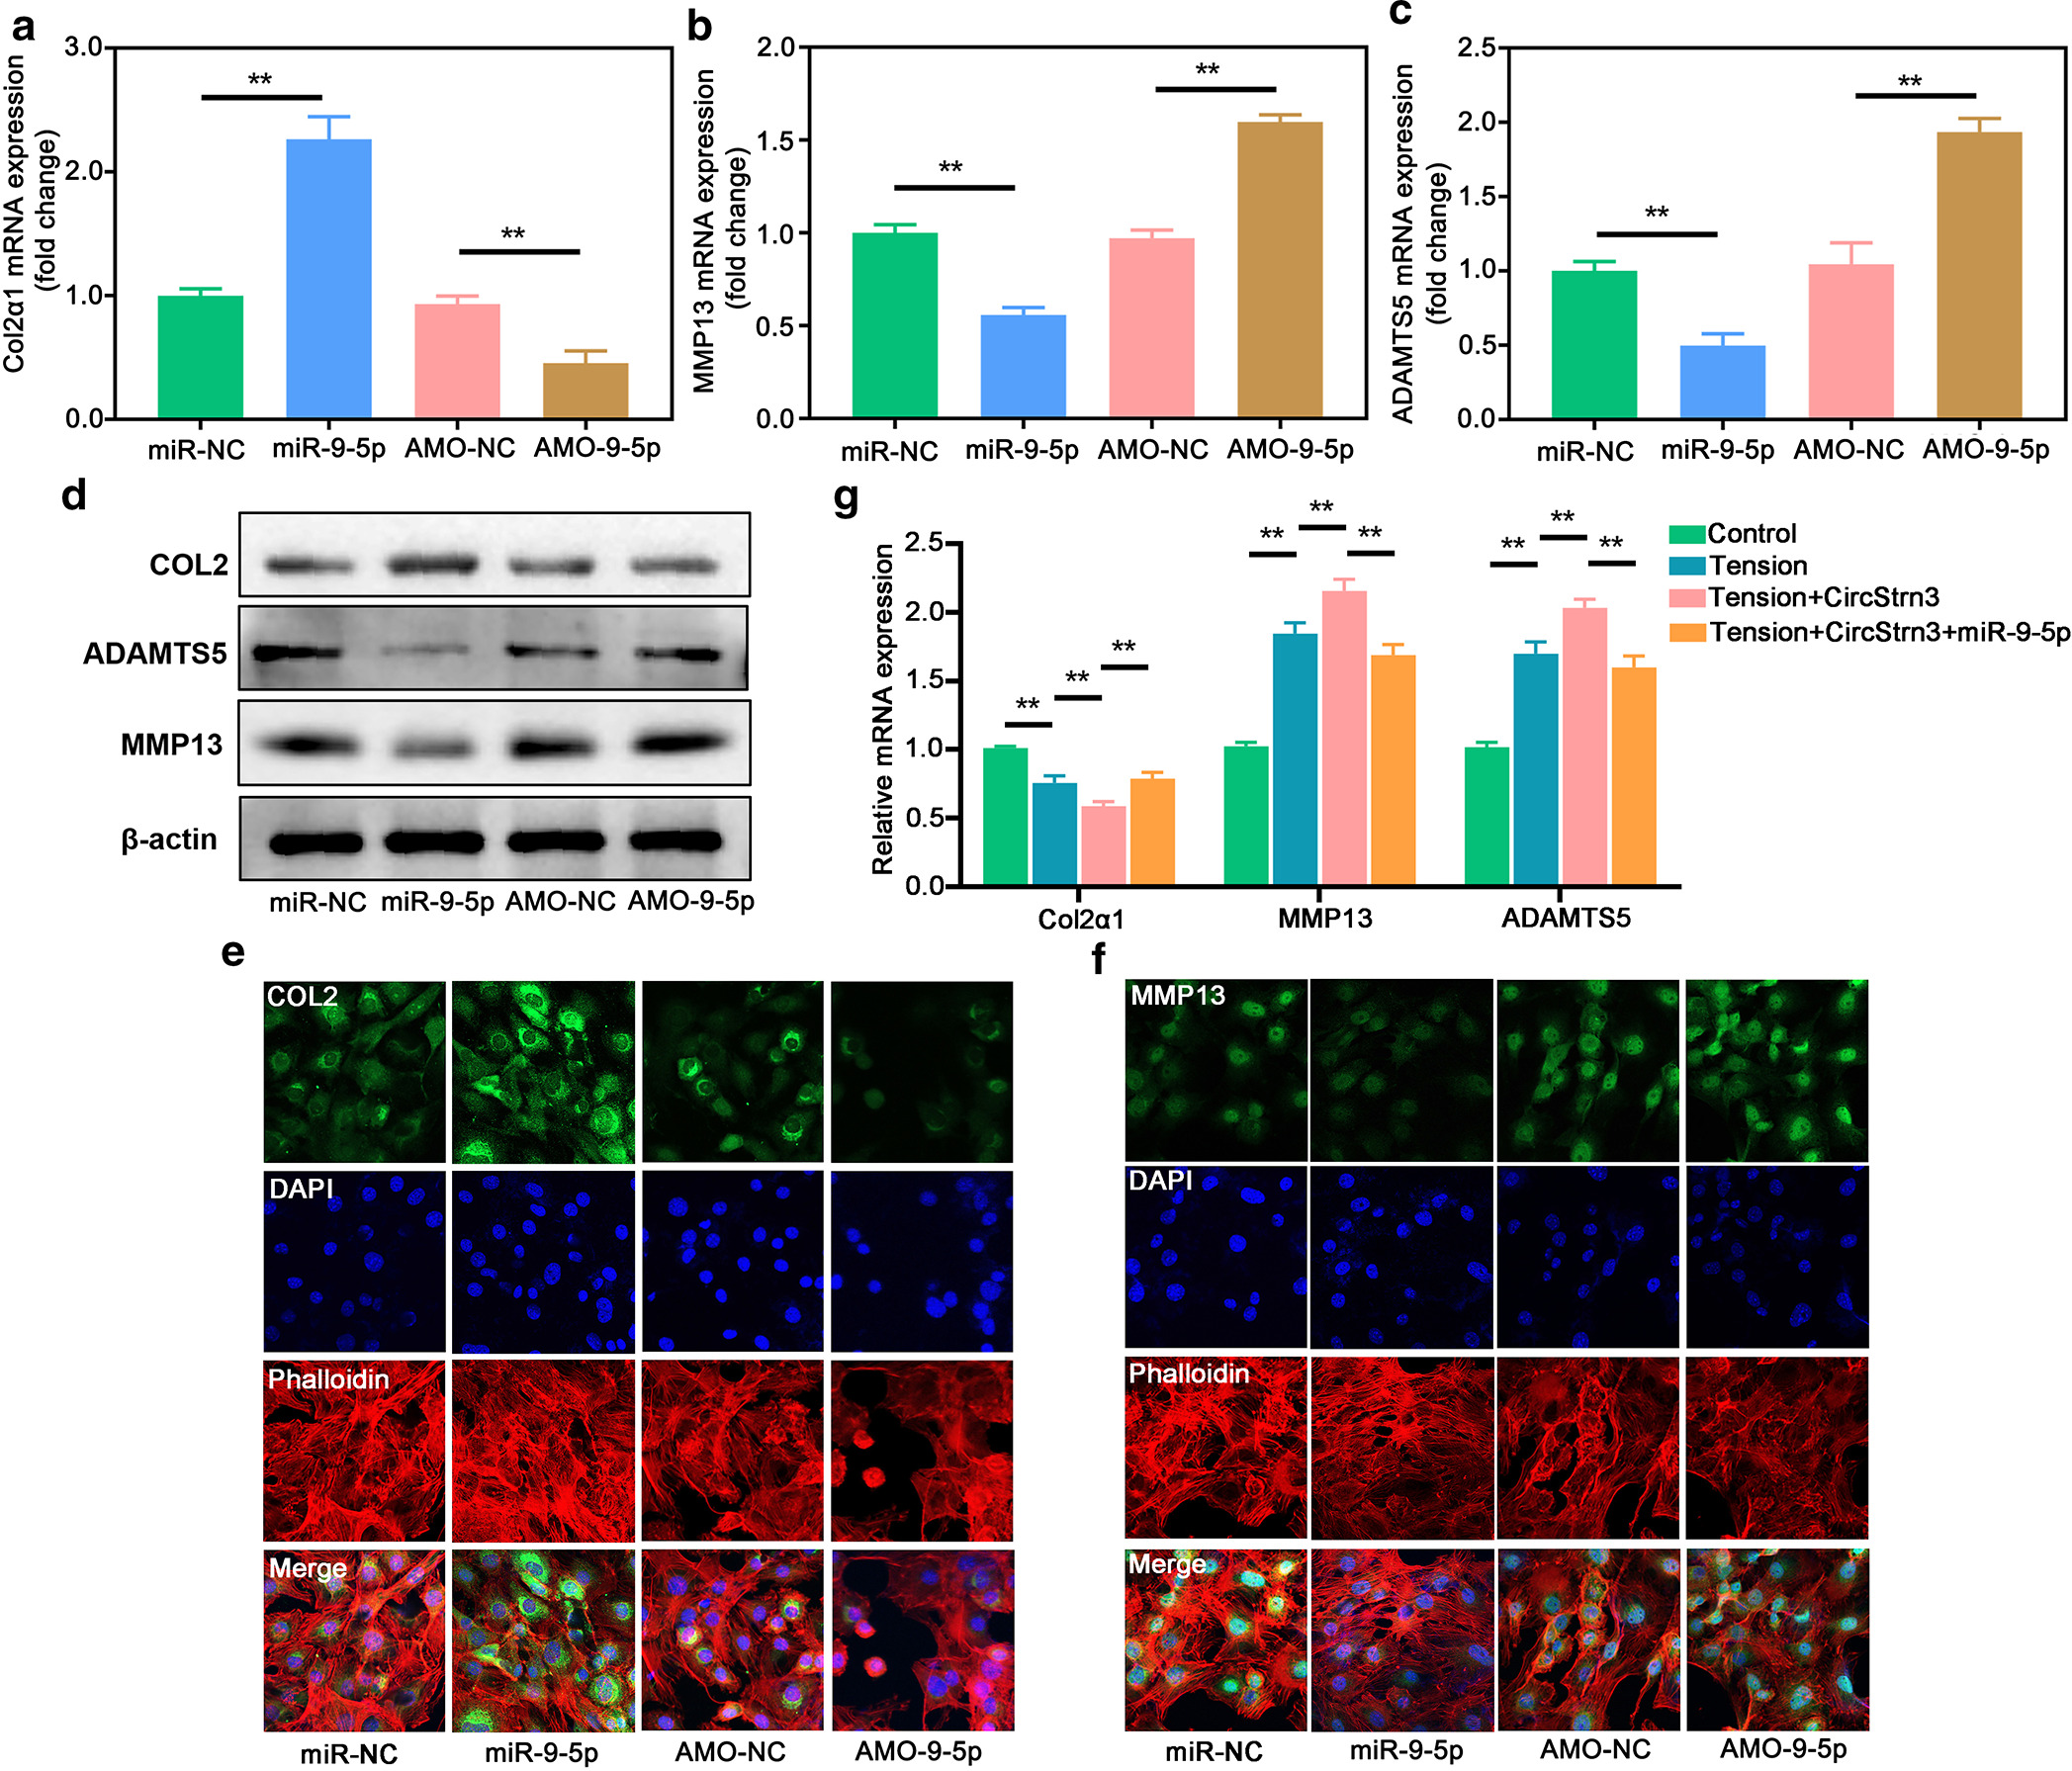 Fig. 4 
            MicroRNA (miR)-9-5p was involved in the regulation of chondrocyte extracellular matrix production. a) to c) Quantitative real-time polymerase chain reaction (qRT-PCR) tested the messenger RNA (mRNA) expressions of COL2α1, matrix metalloproteinase (MMP)-13, and a disintegrin and metalloproteinase with thrombospondin motifs 5 (ADAMTS5) in chondrocytes transfected with miR-9-5p mimic and anti-miRNA oligonucleotide (AMO)-9-5p (n = 4, **p < 0.01). d) Western blot tested the expressions of COL2α1, MMP-13, and ADAMTS5 in chondrocytes transfected with miR-9-5p mimic and AMO-9-5p (n = 4). e) and f) Immunofluorescence assay tested the expressions of COL2α1 and MMP-13 in chondrocytes transfected with miR-9-5p mimic and AMO-9-5p (n = 4; scale bar: 10 μm). g) qRT-PCR tested the mRNA expressions of COL2α1, MMP-13, and ADAMTS5 in chondrocytes transfected with miR-9-5p mimics or circStrn3, followed by stimulation of tensile strain or control condition (n = 4, **p < 0.01). Independent-samples t-test was used to compare data between two groups, and one-way analysis of variance was used for comparison between multiple groups. DAPI, 4′,6-diamidino-2-phenylindole; NC, negative control.
          